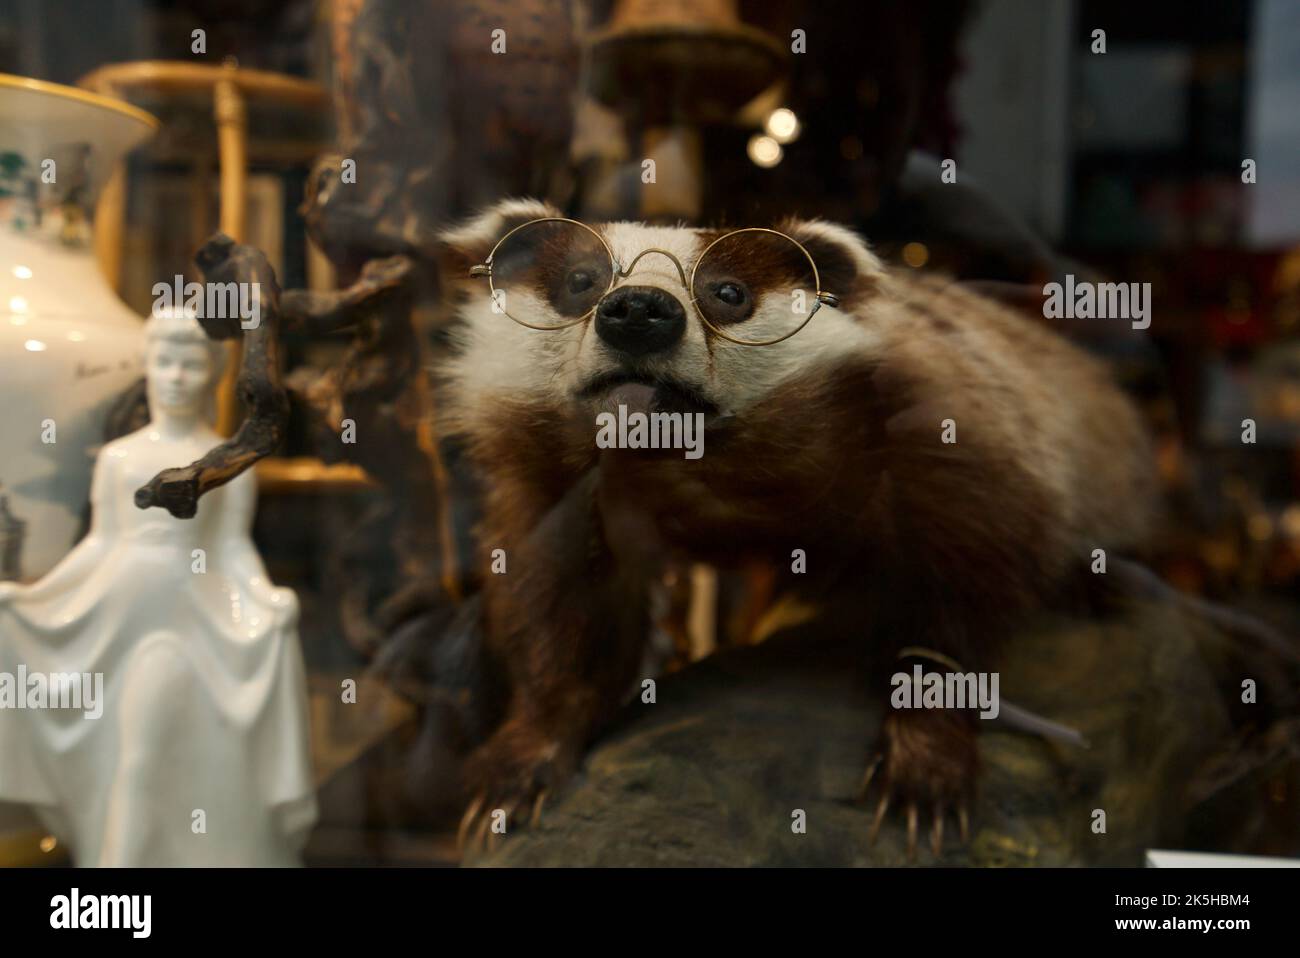 Funny taxidermy badger wearing glasses in an antique shop (Vintage Anthropomorphic Taxidermy) Stock Photo